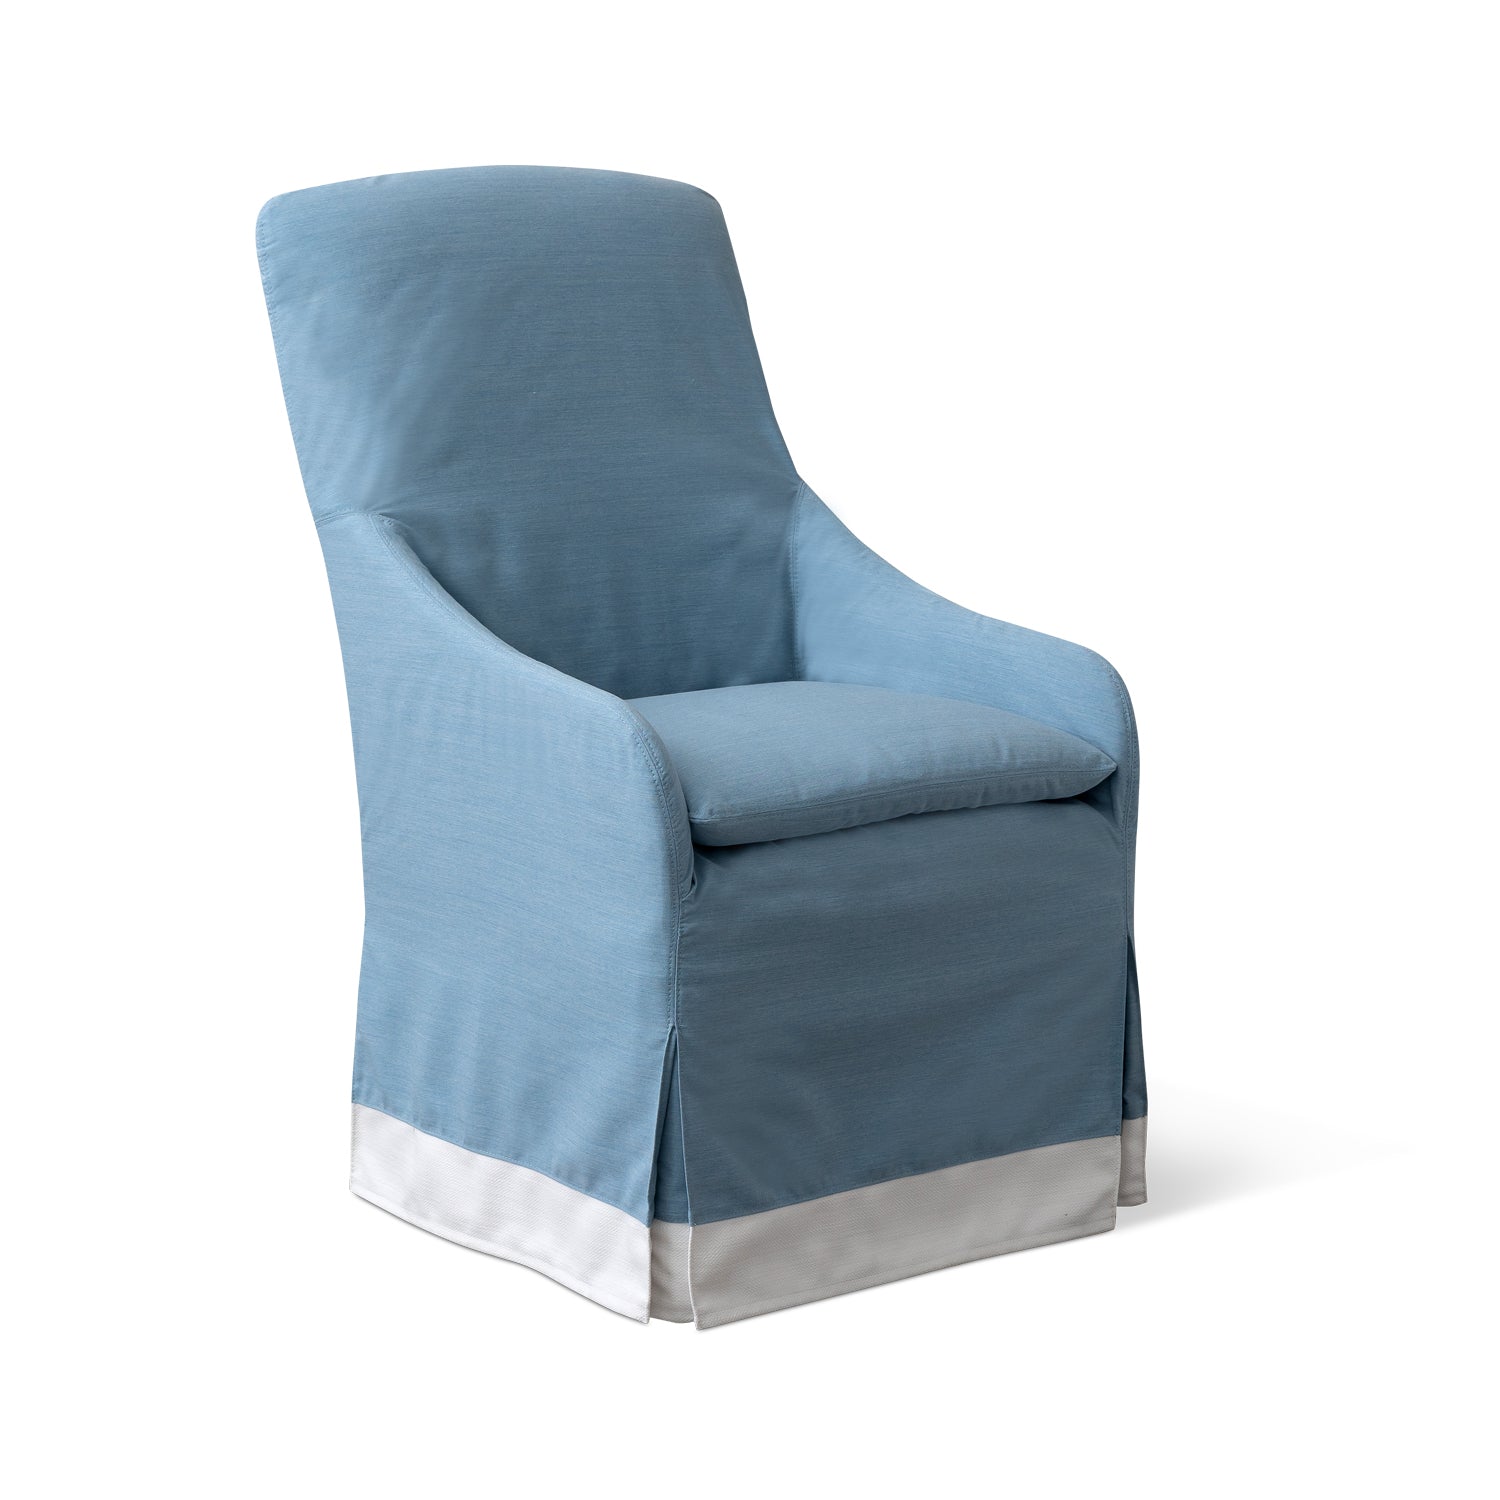 Mimosa Outdoor Dining Chair in Davenport Blue with Banding